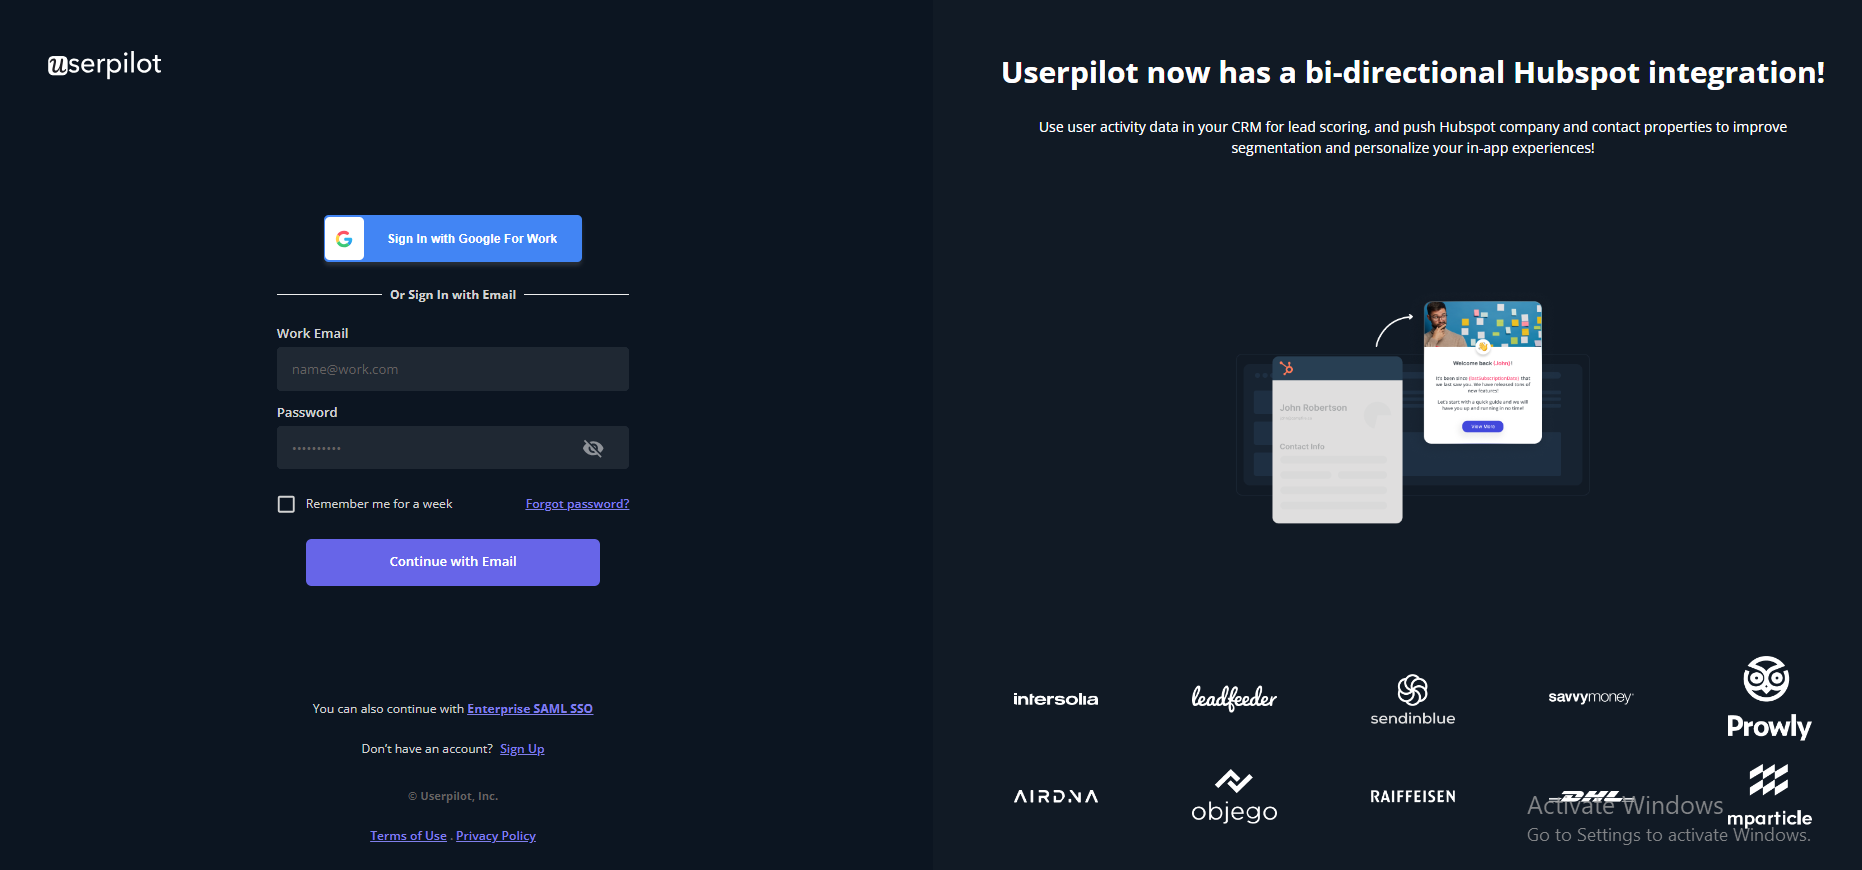 Sign-up flow example from Userpilot